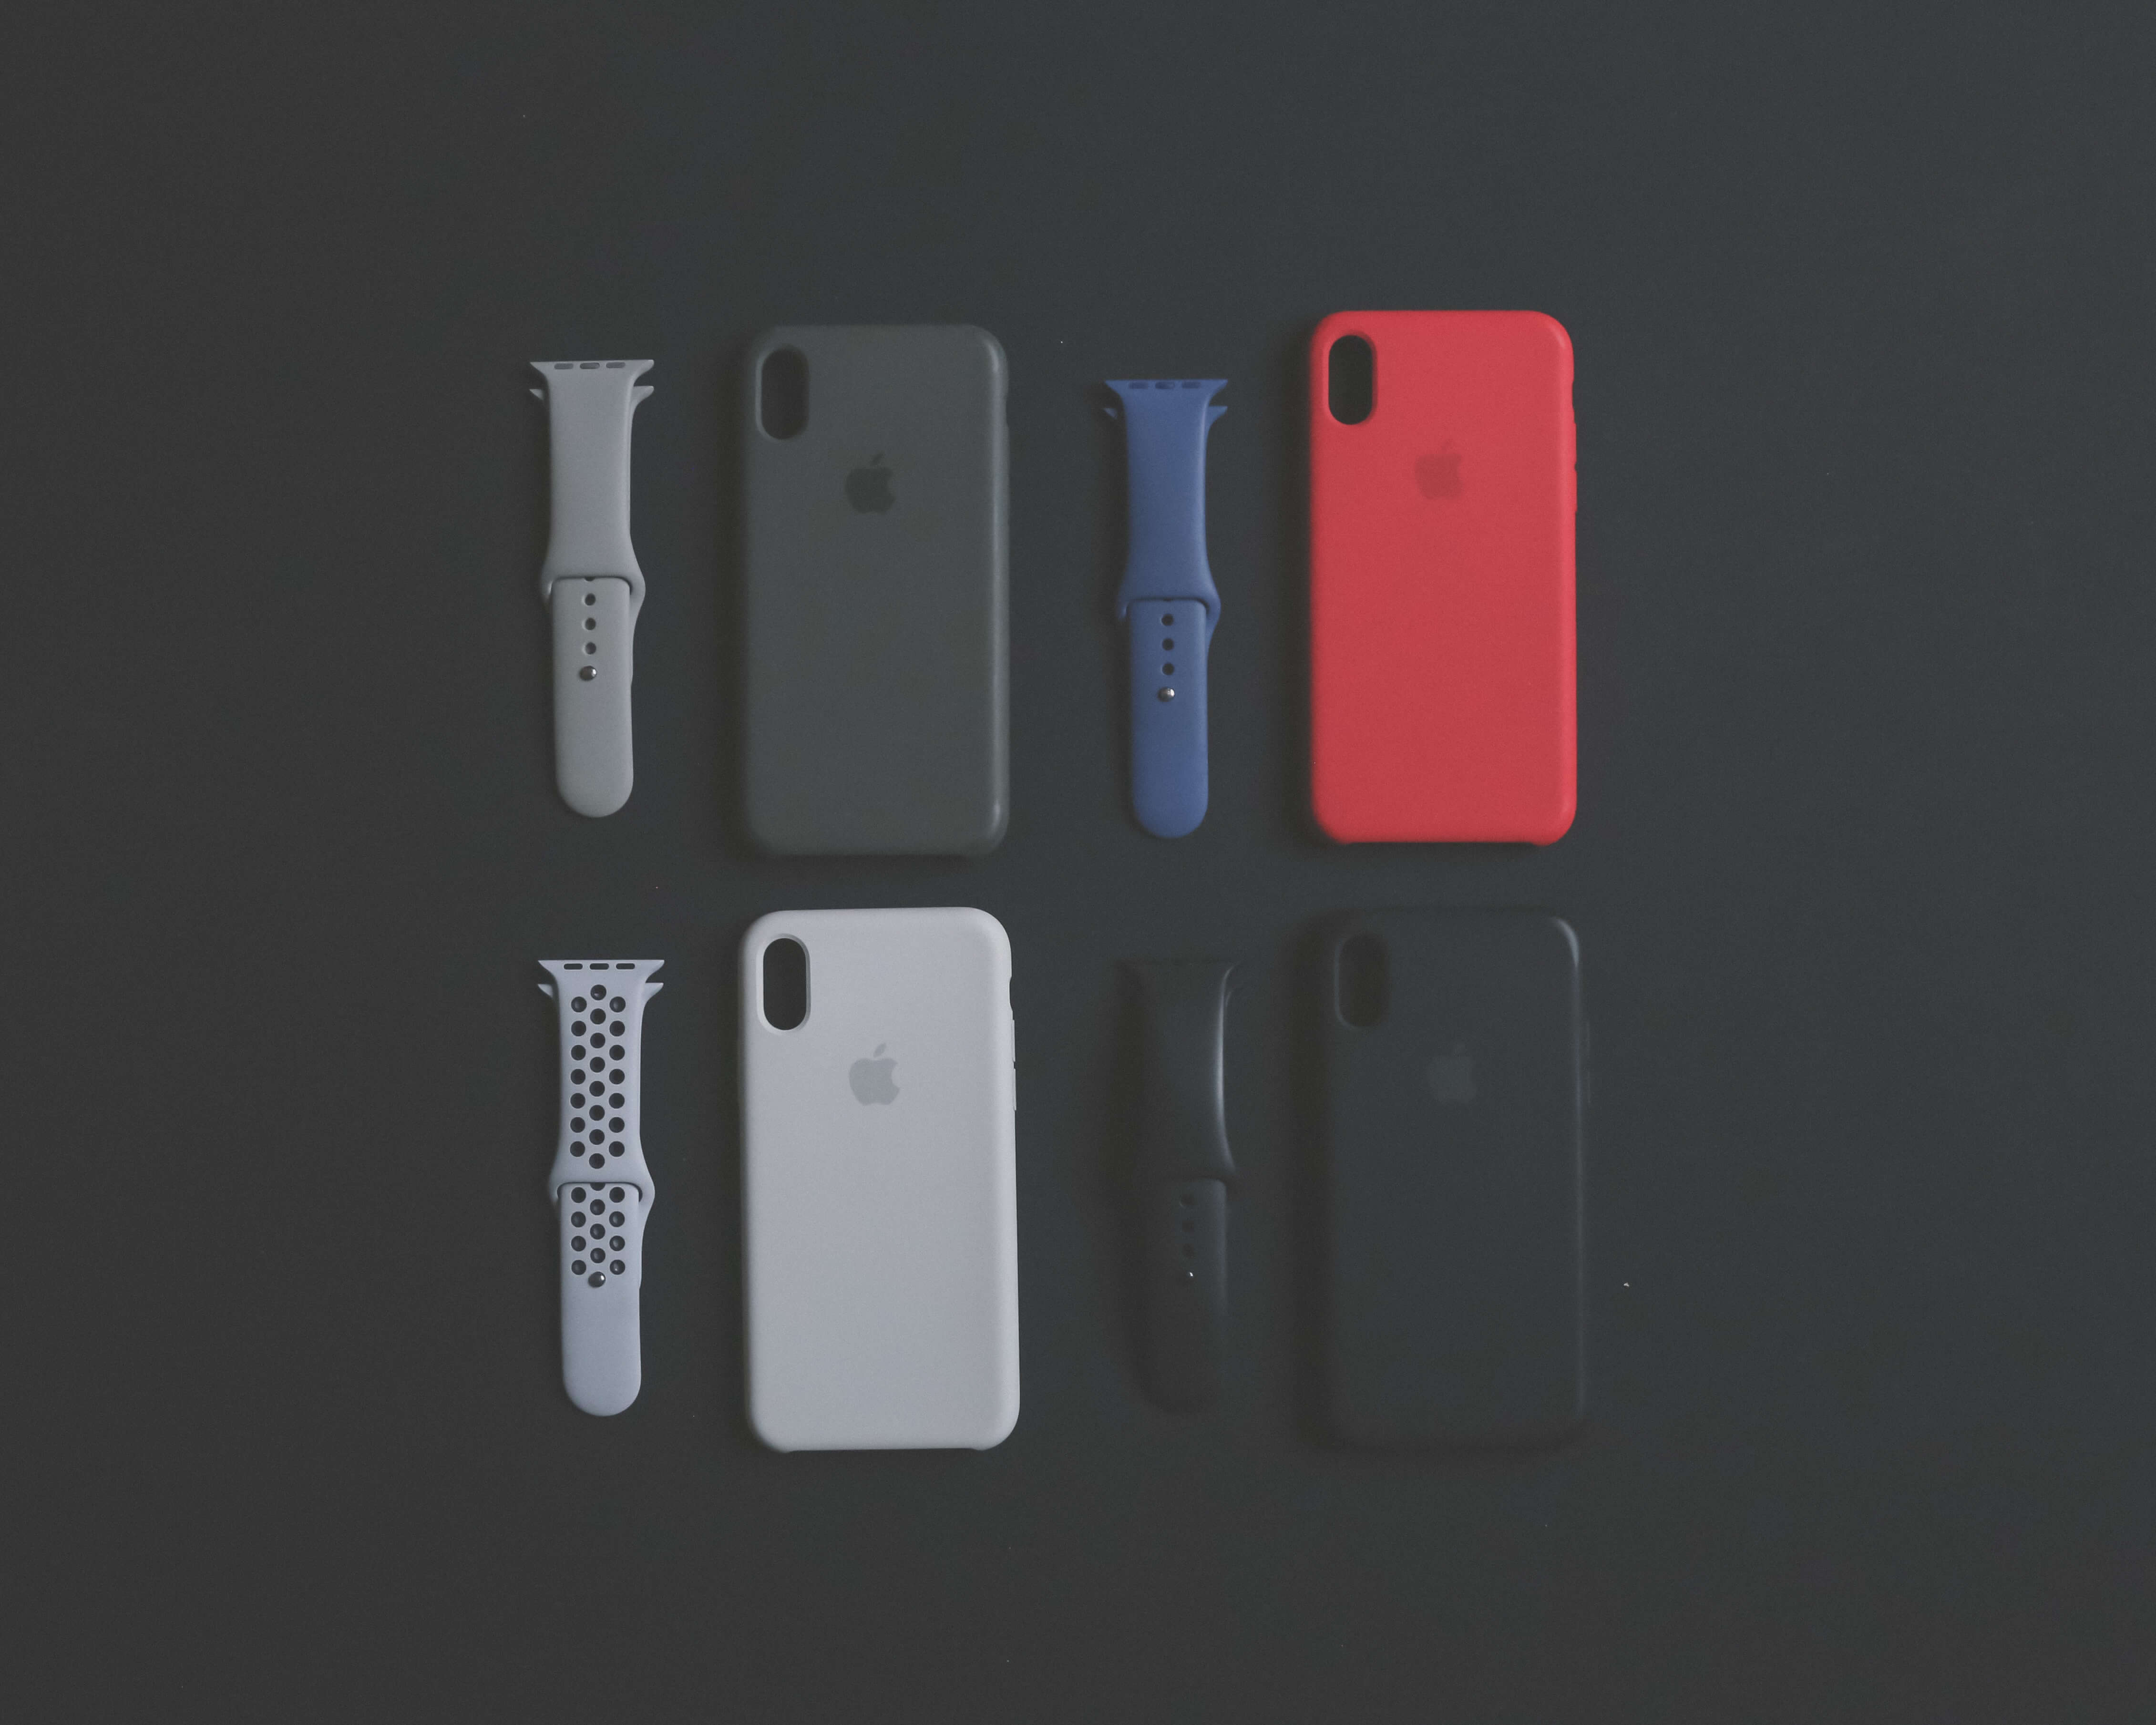 Different colored iPhone cases and watch straps